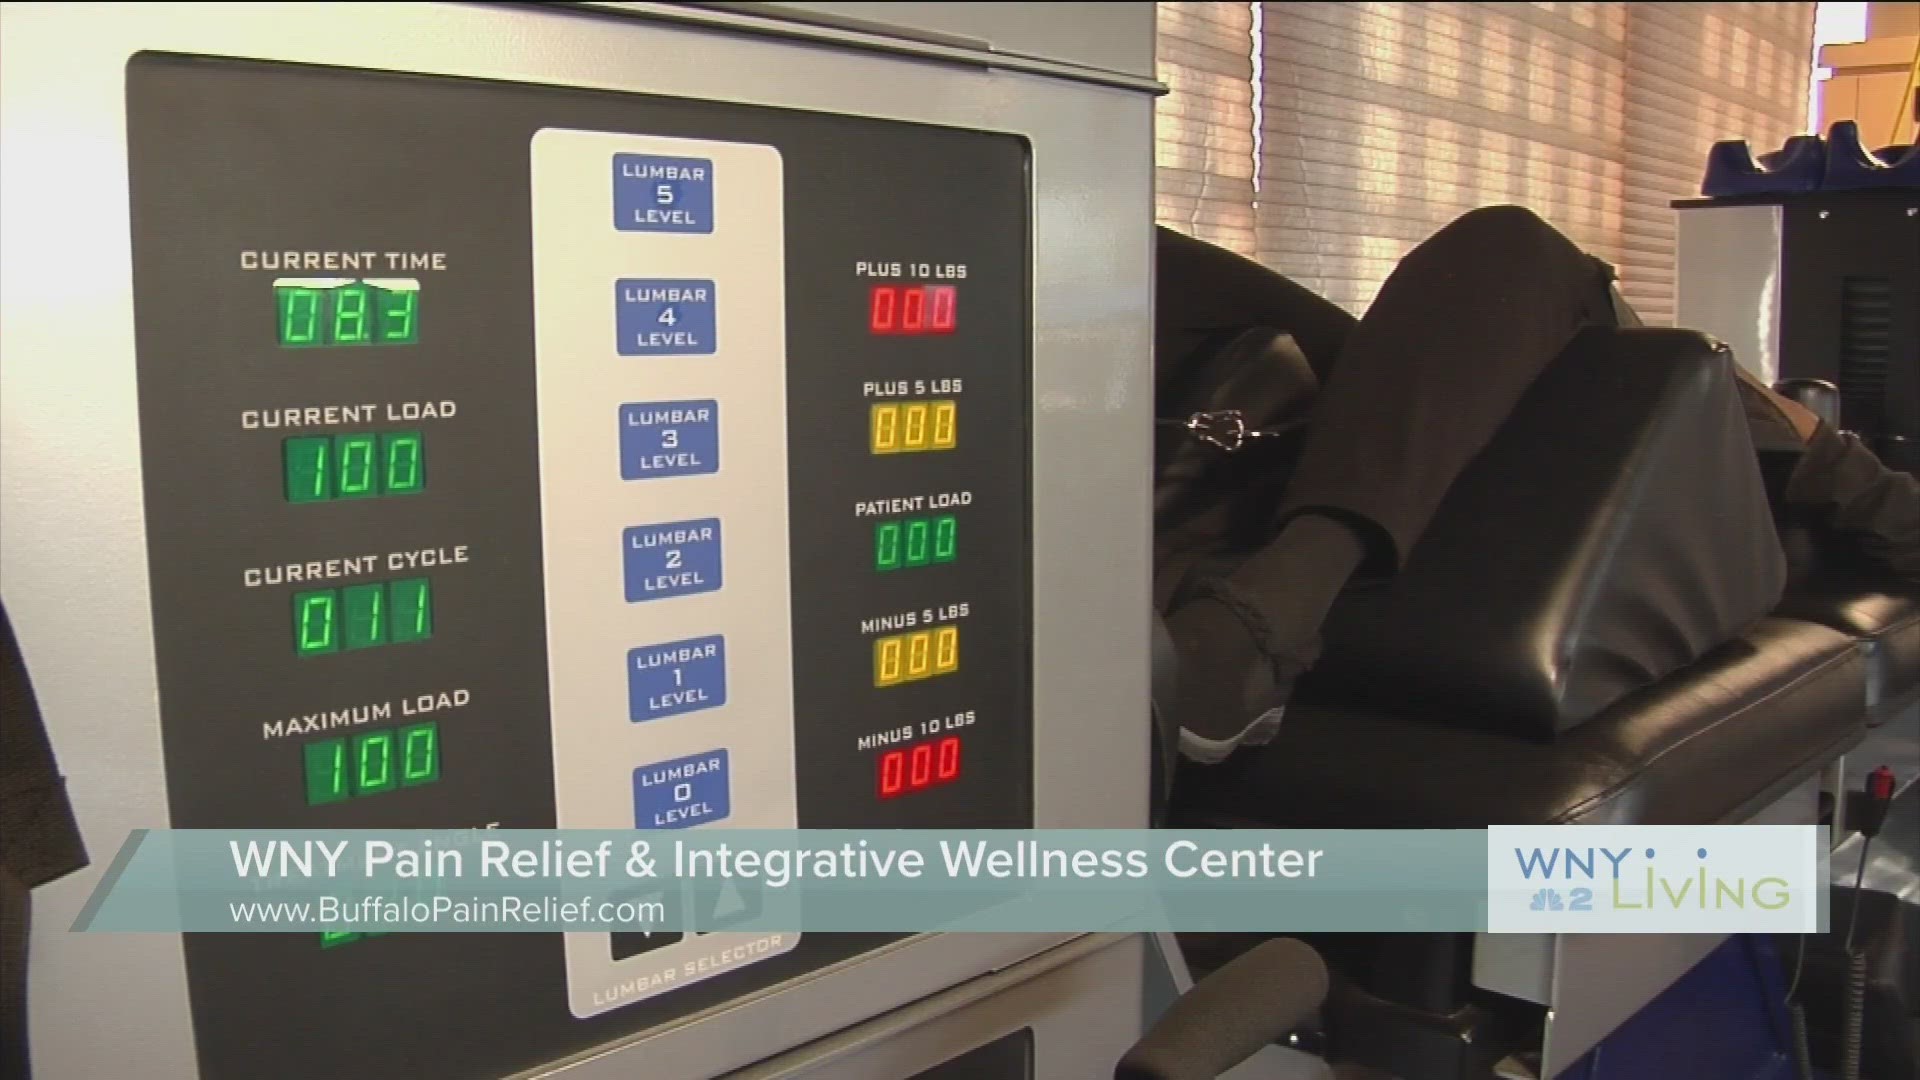 WNY Living - June 3 - WNY Pain Relief & Integrative Wellness Center (THIS VIDEO IS SPONSORED BY WNY PAIN RELIEF & INTEGRATIVE WELLNESS CENTER)